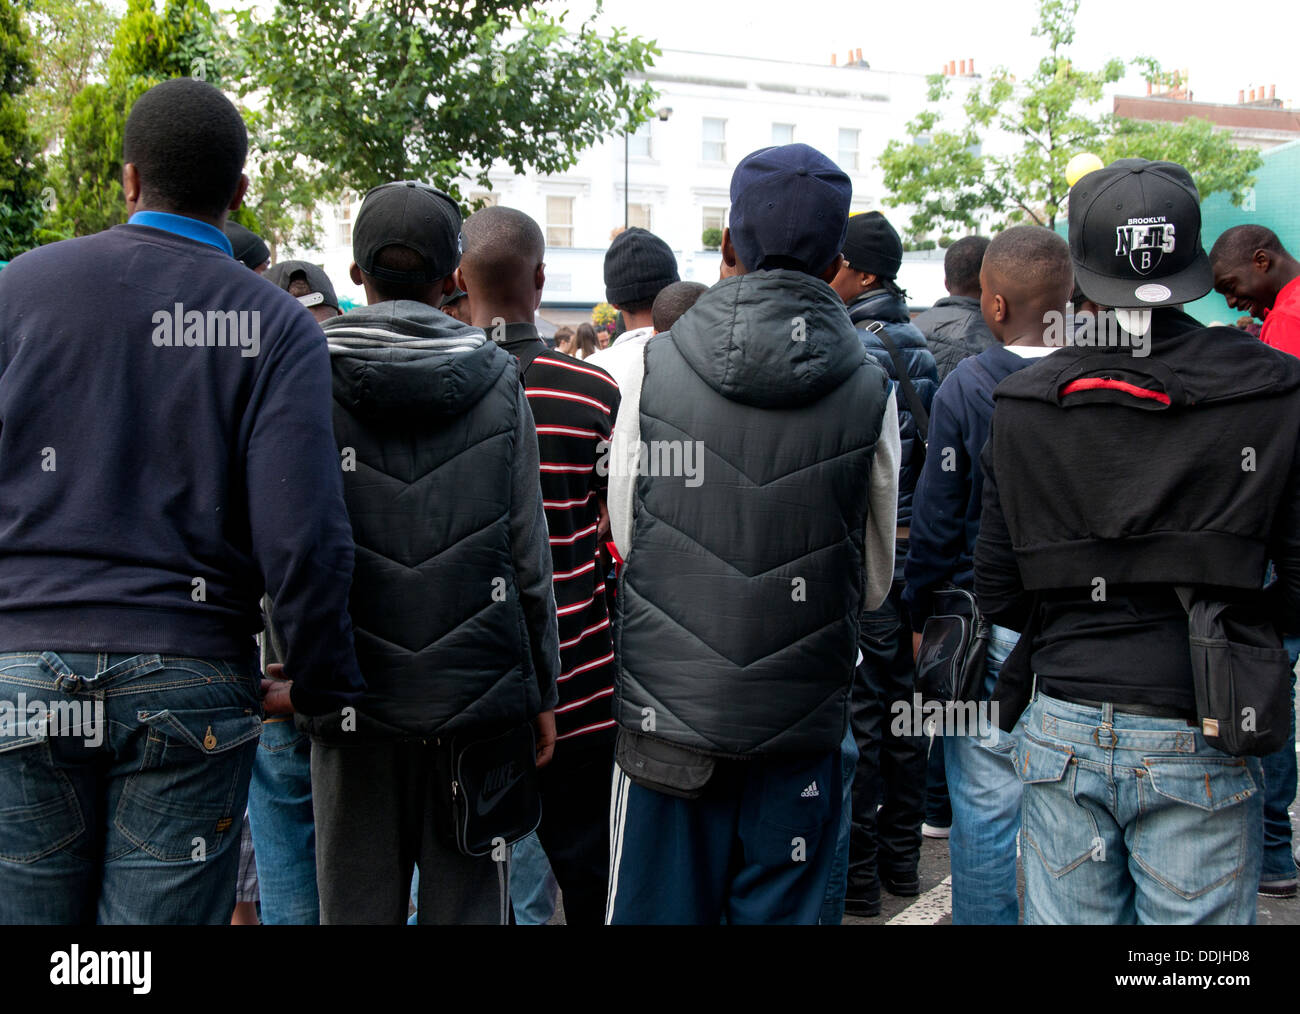 Back view of large group of youths together in London street Stock Photo